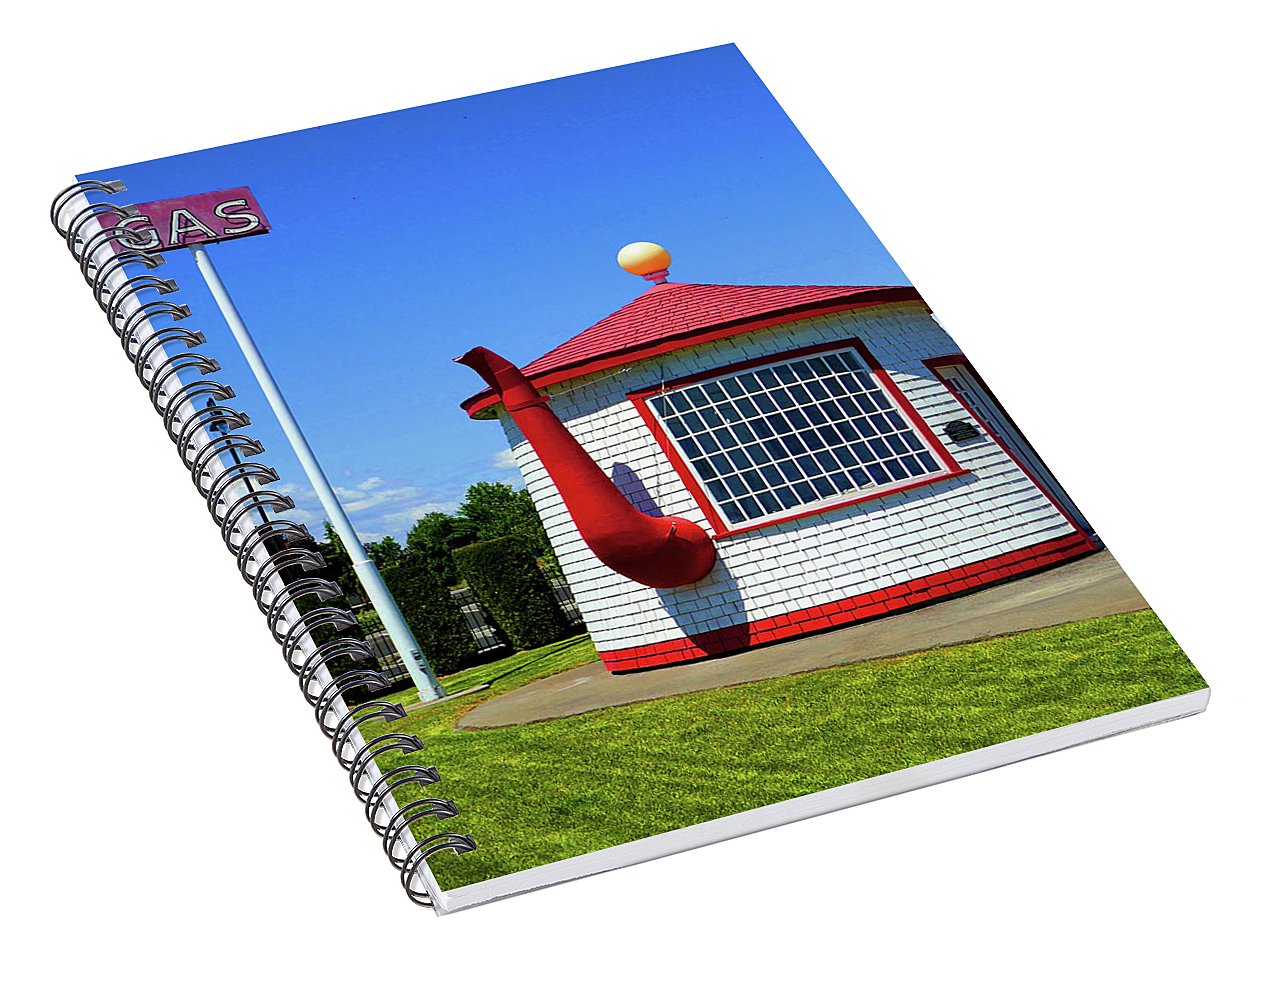 Historic Teapot Dome Service Station - Spiral Notebook - Fry1Productions